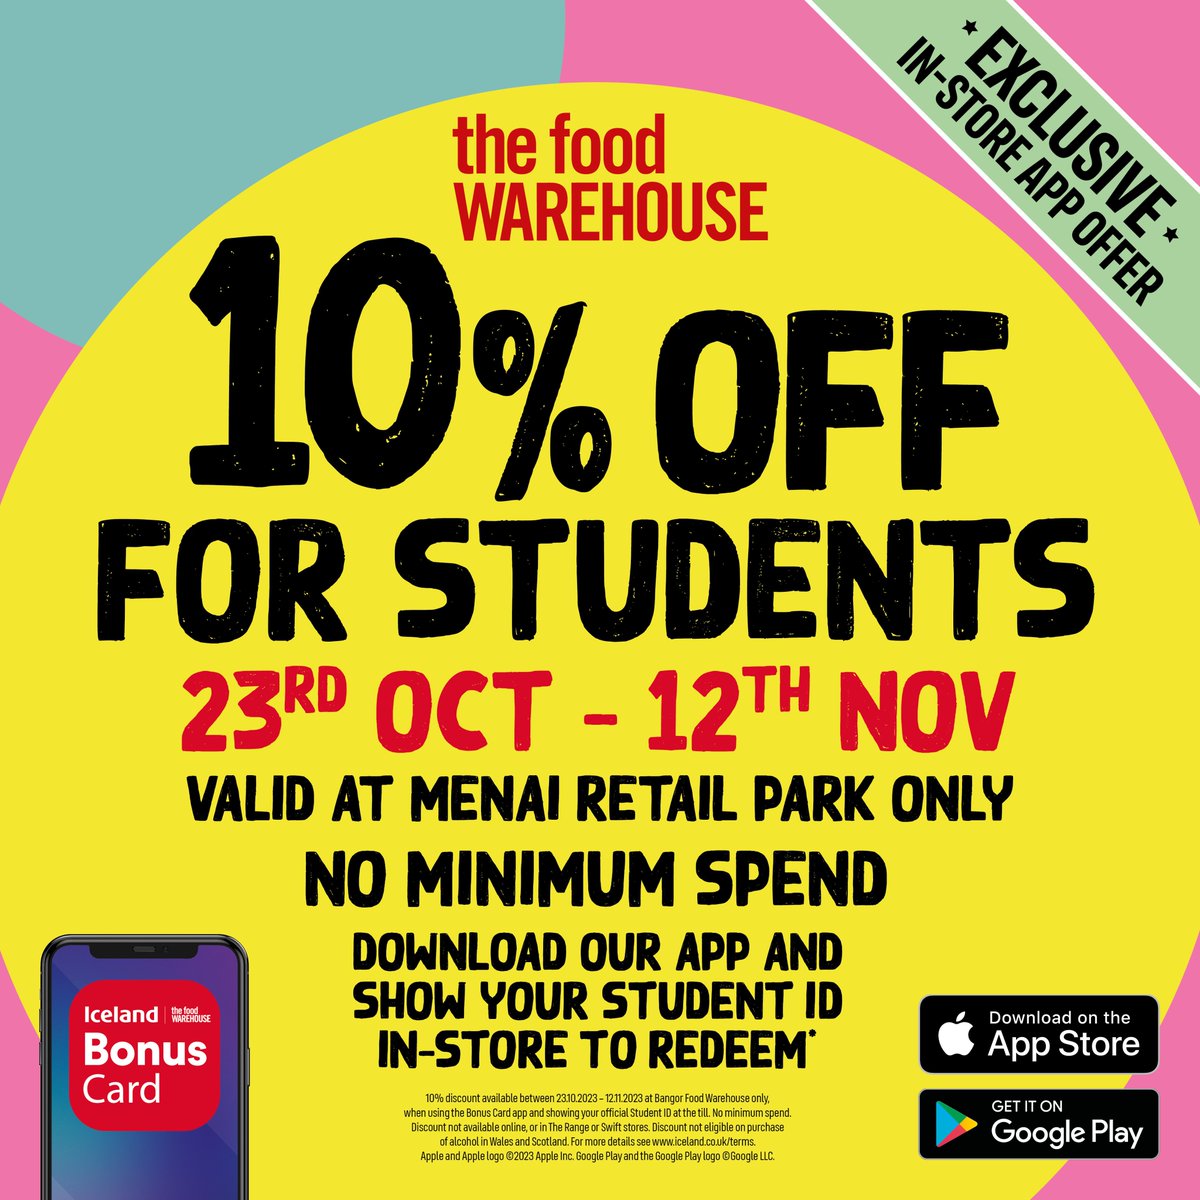 Calling all students! We’re giving you 10% off your entire shop between 23rd October – 12th November only at The Food Warehouse in Bangor. Download our Bonus Card App today and get yourself down to Menai Retail Park with your student ID, to grab a great discount while you can.